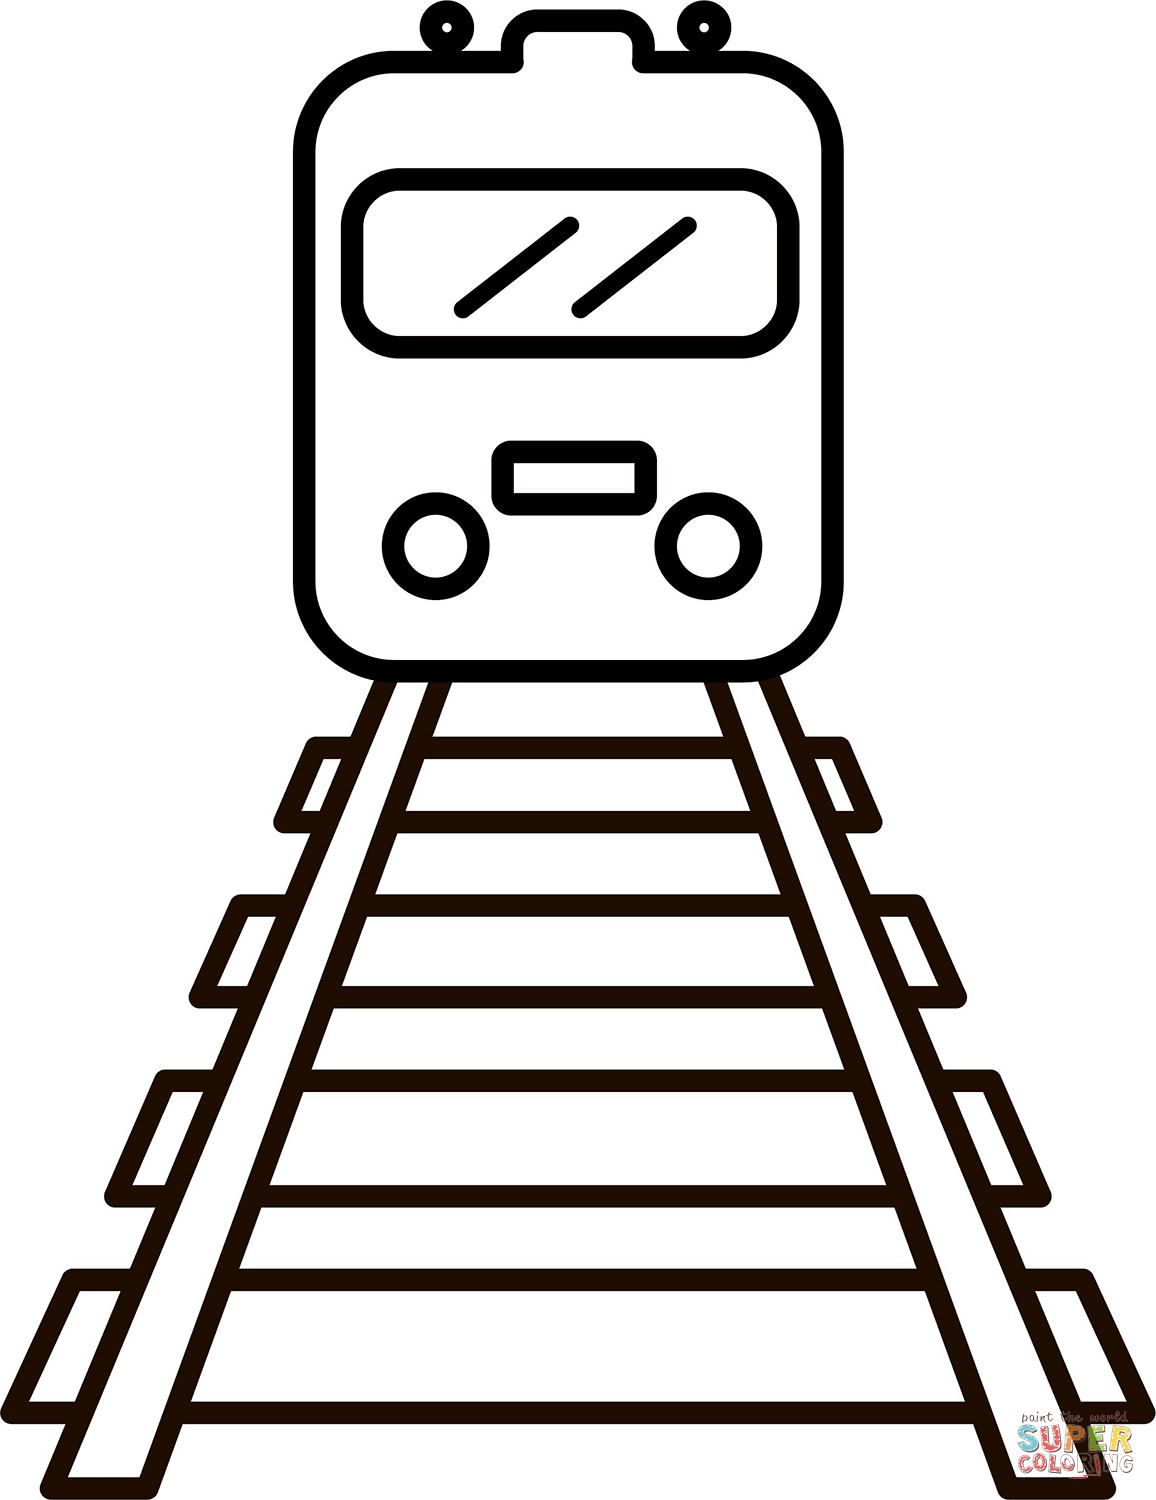 Train tracks coloring page free printable coloring pages